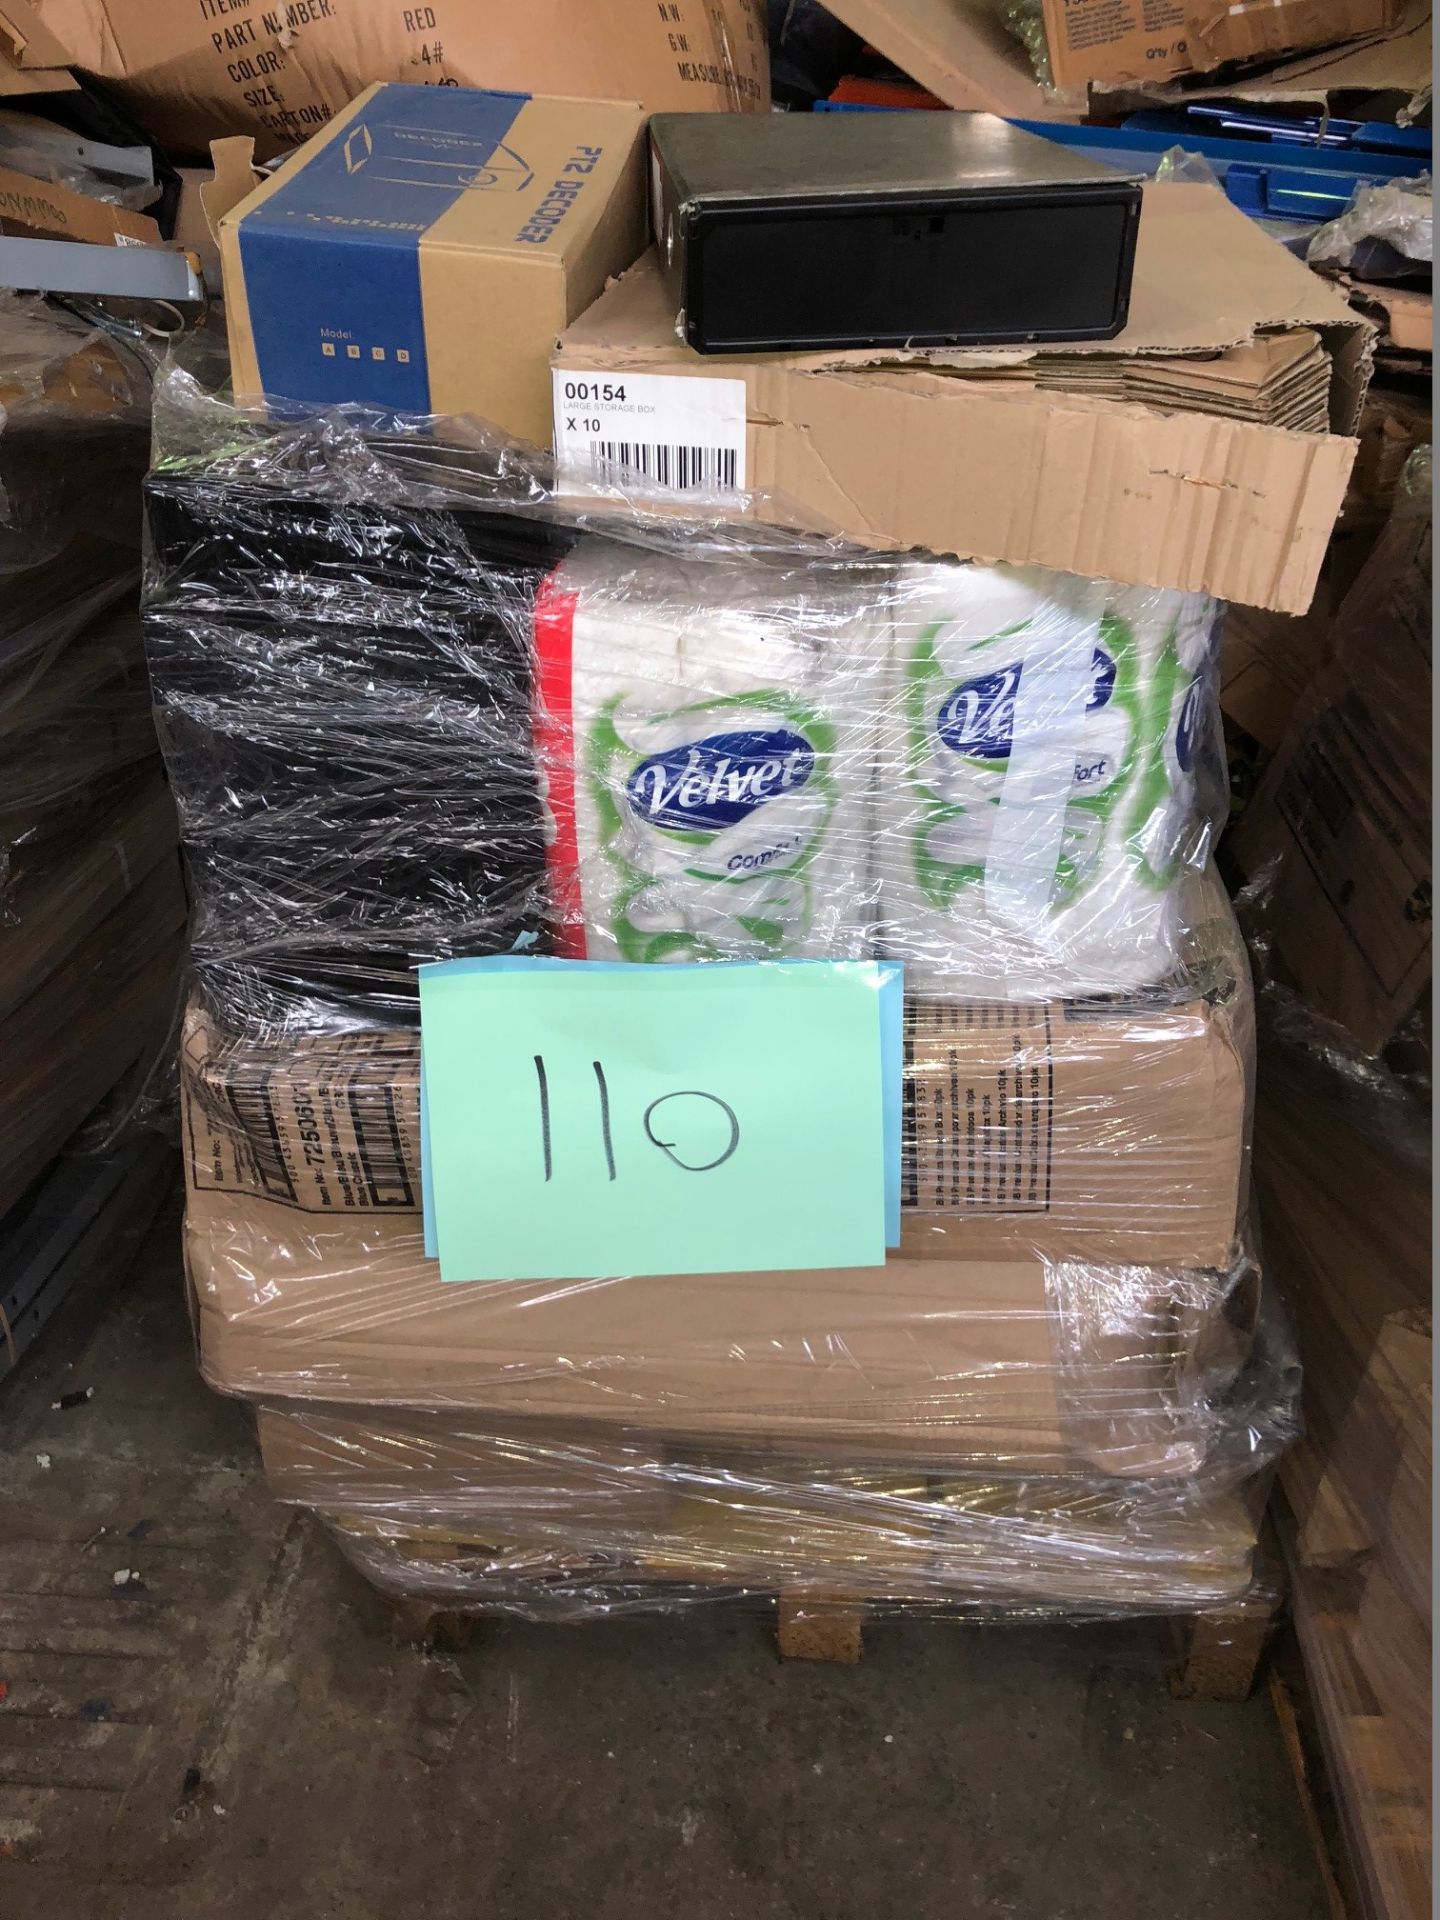 1 x Pallet of Mixed Stock/Stationery Including Toilet Roll, Box Files, Bankers Boxes, Document